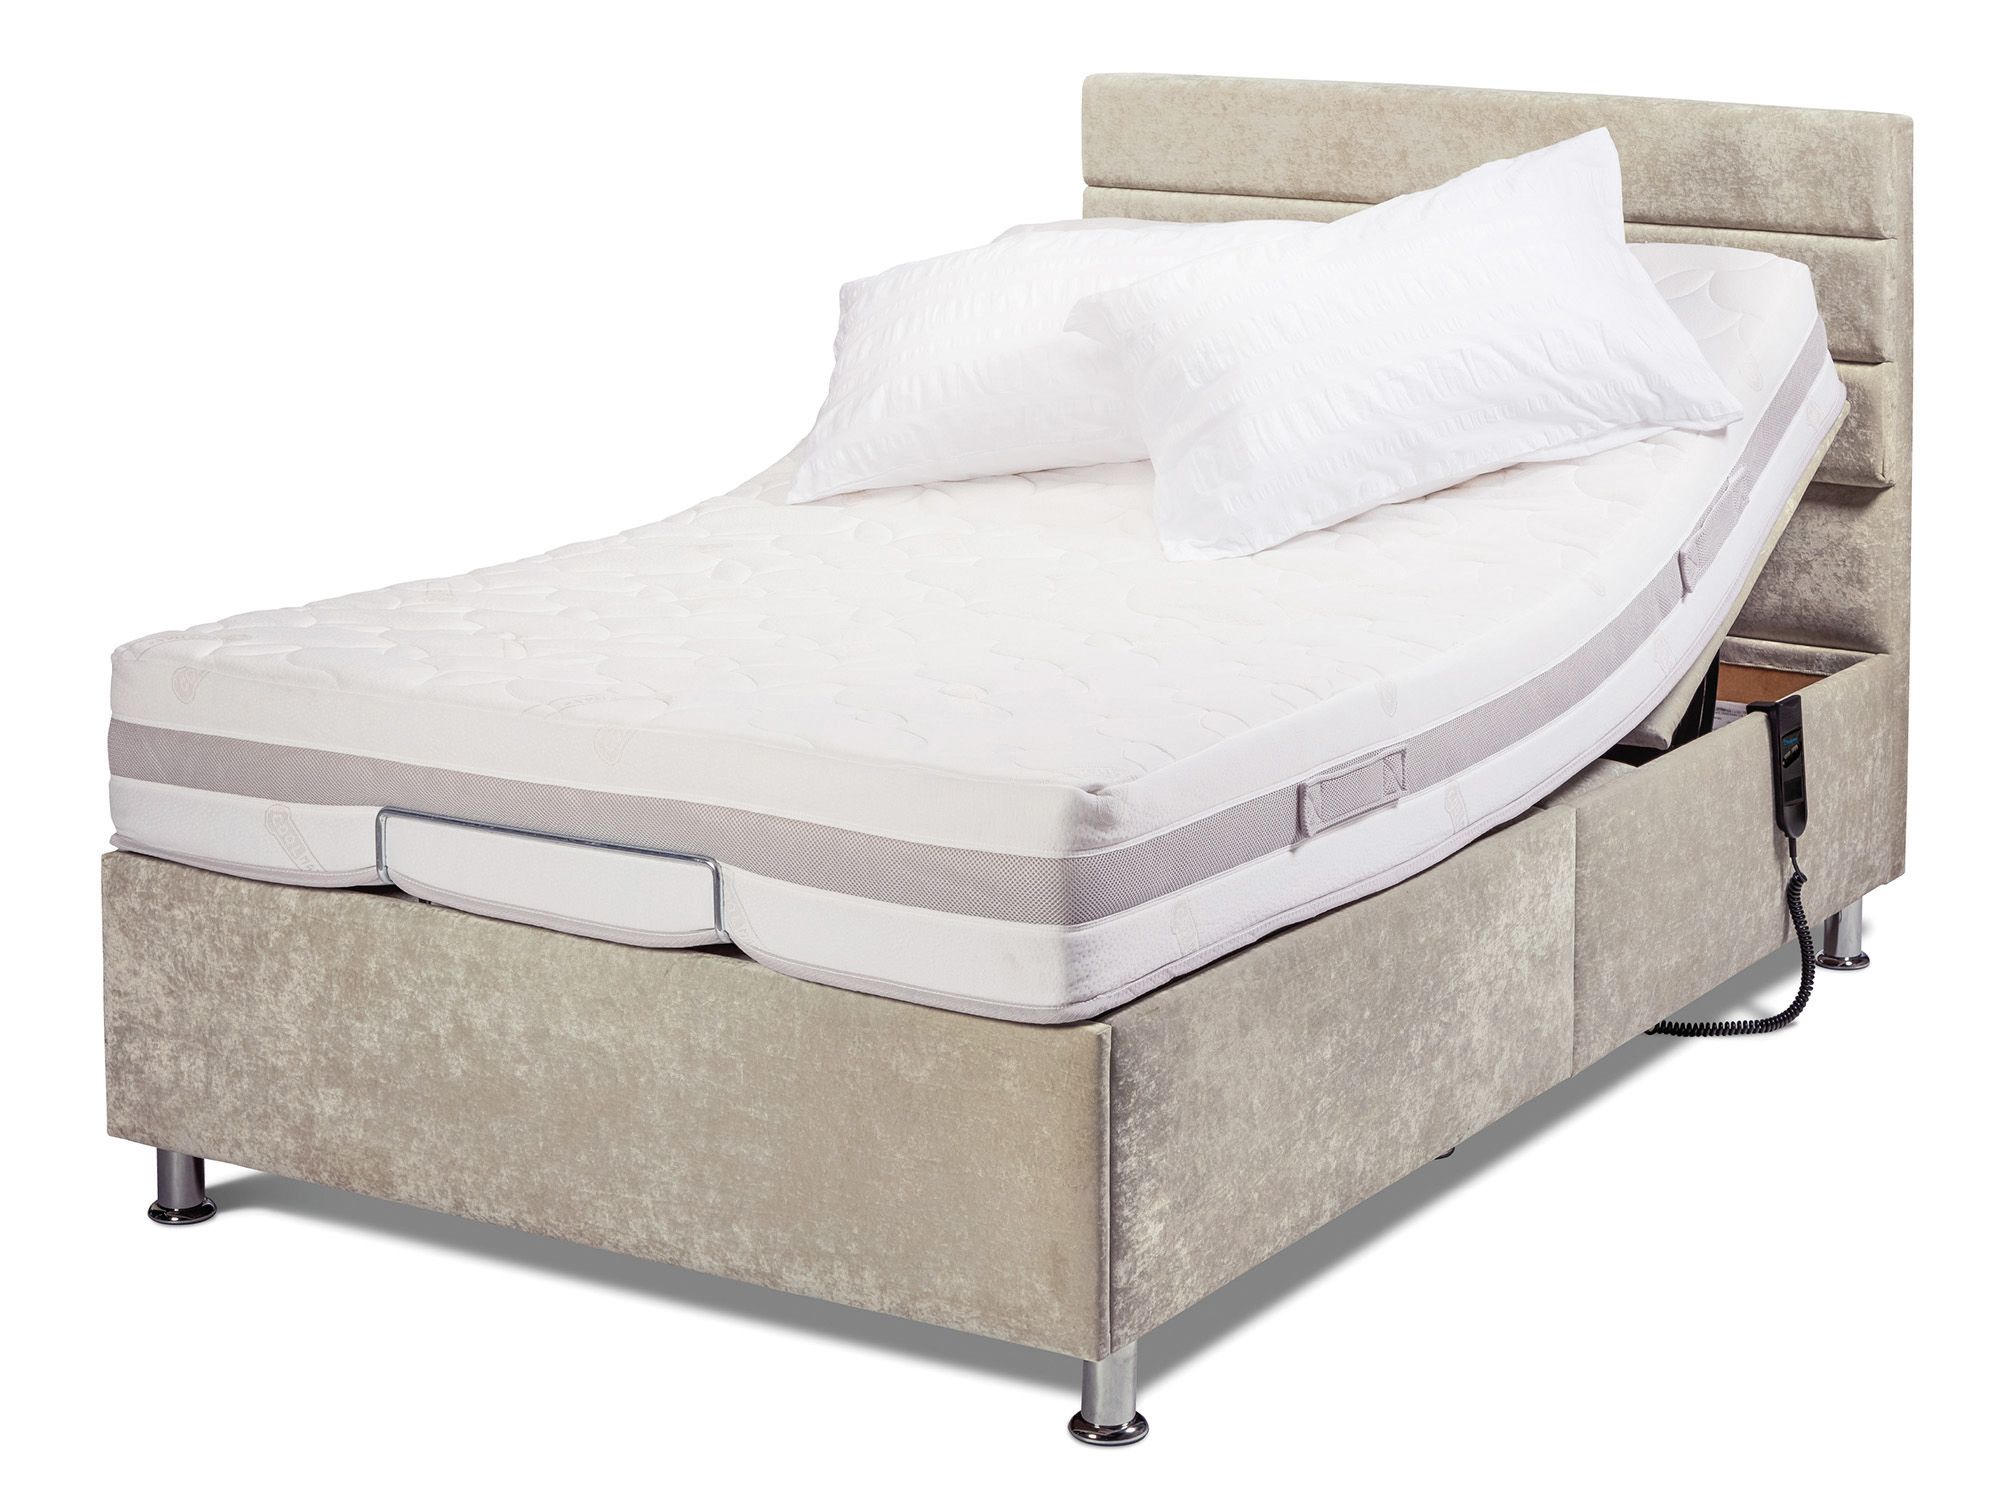 mattress too small for bed